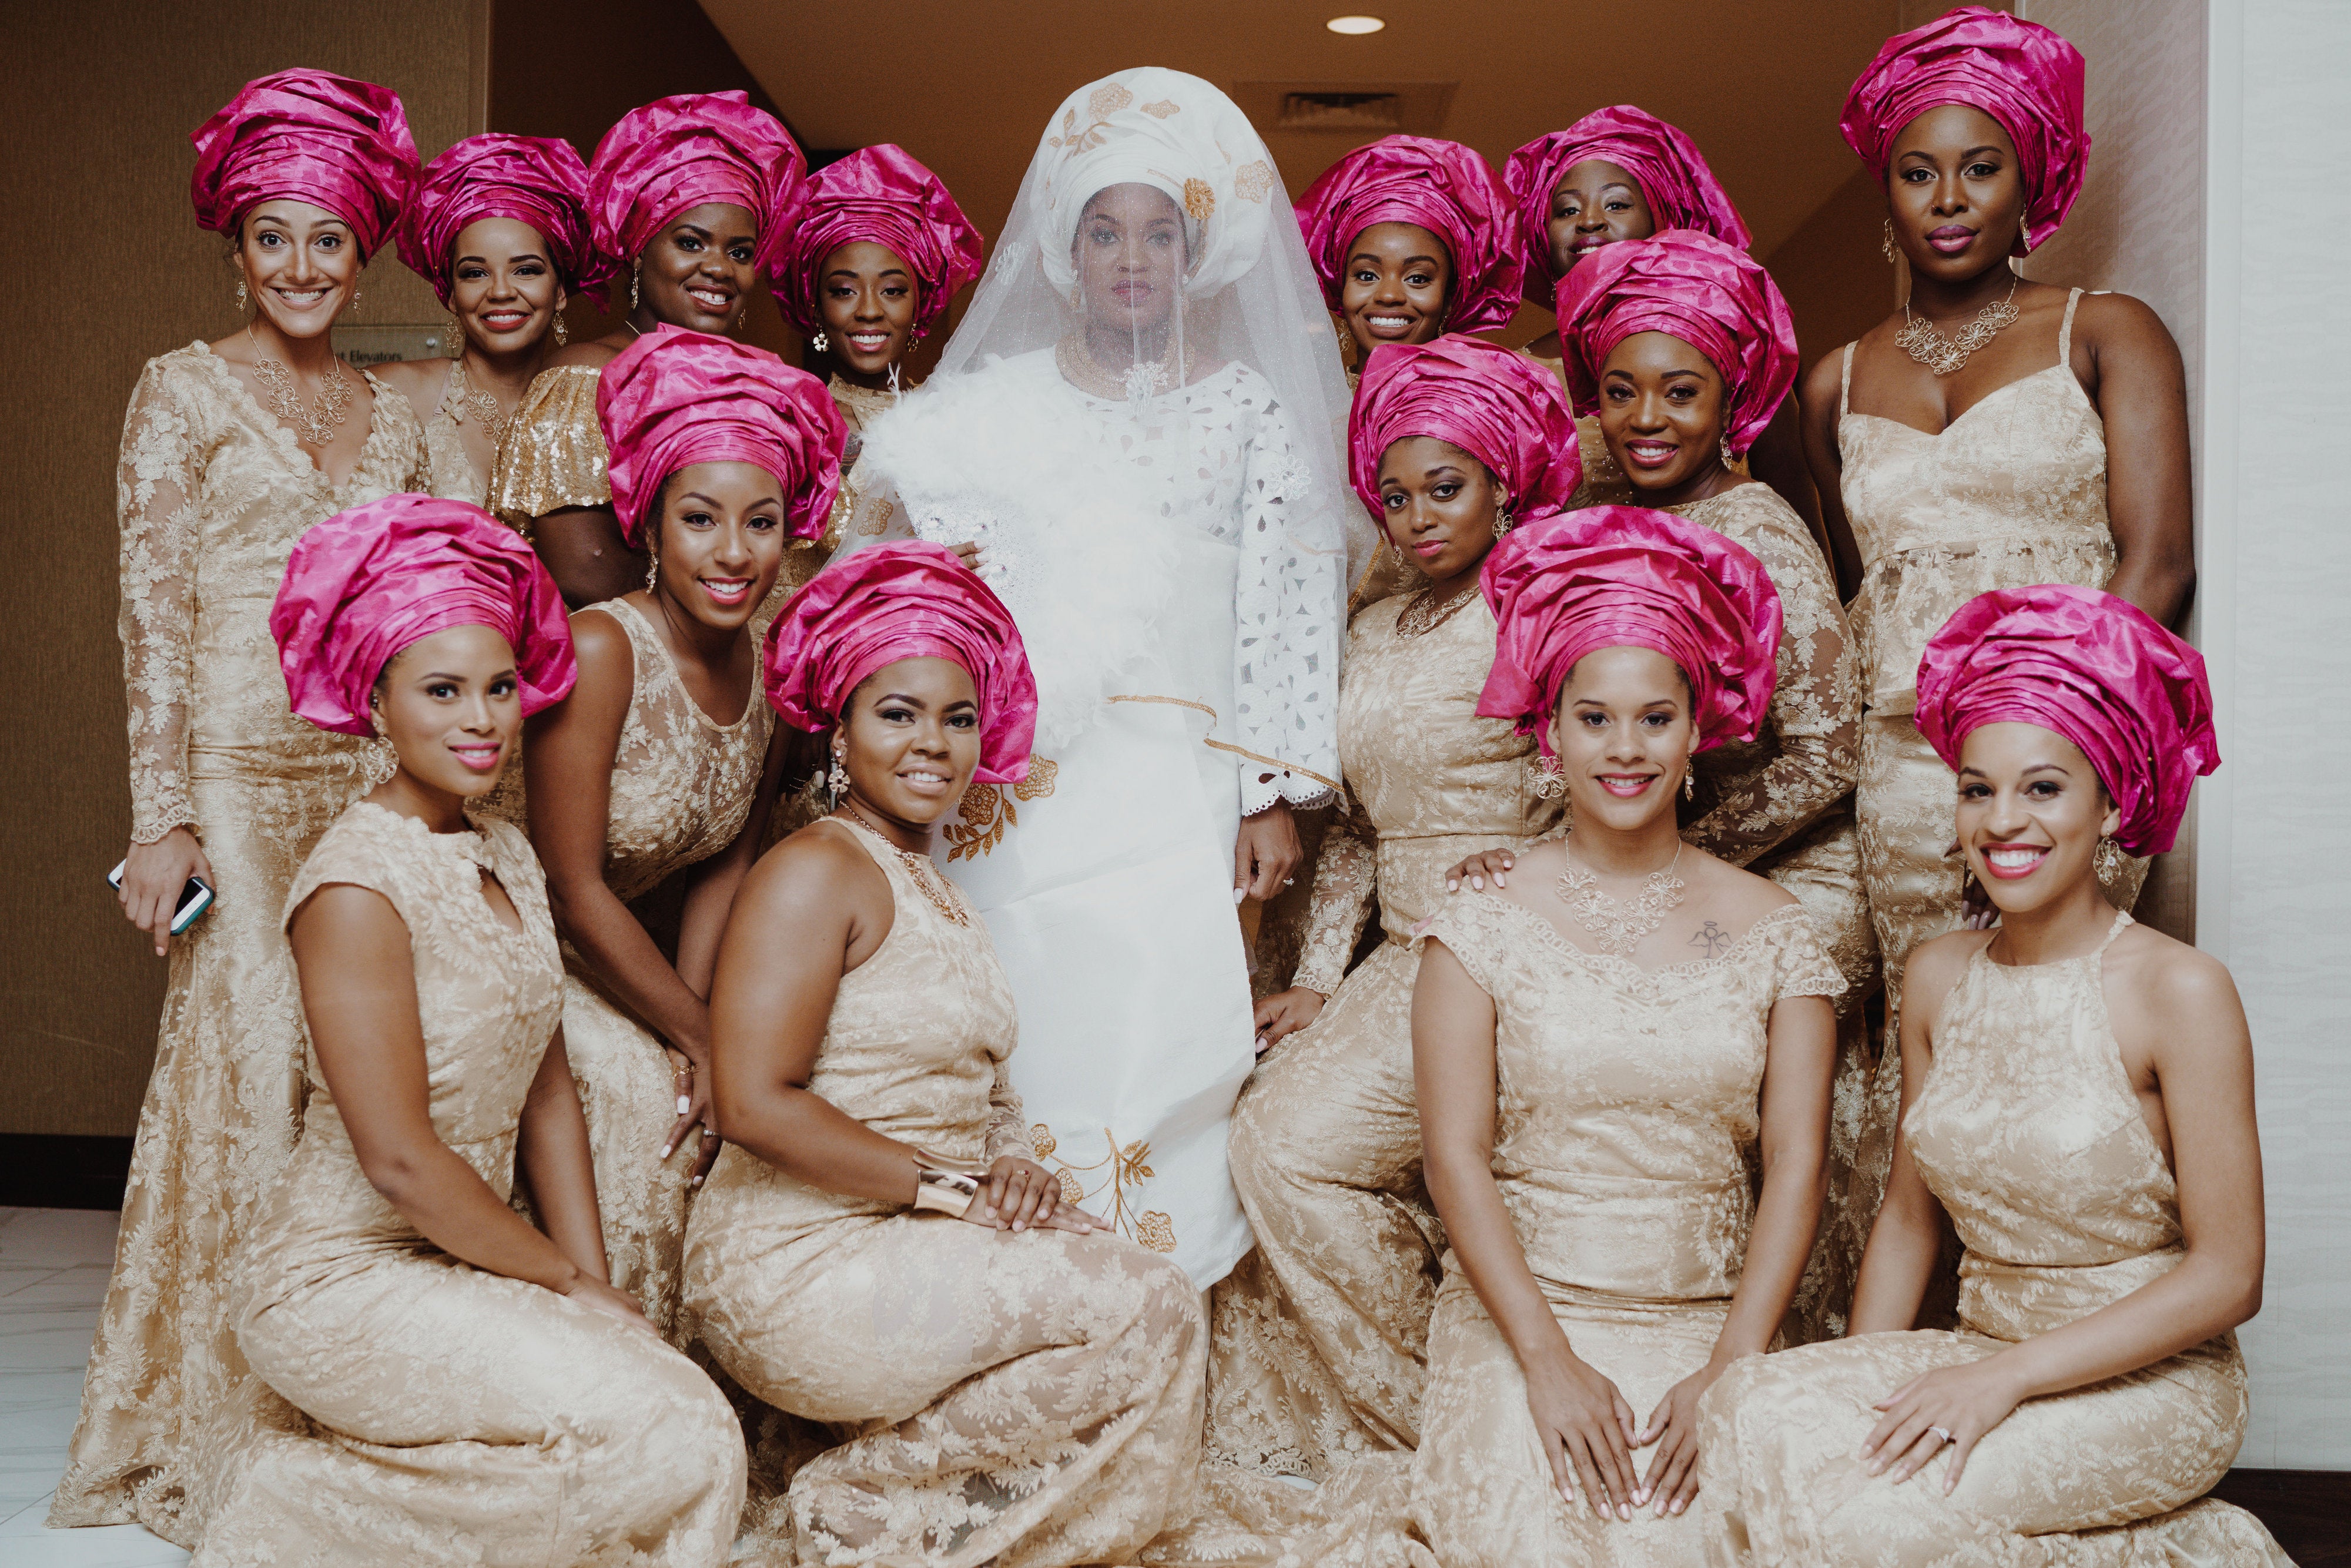 Bridal Bliss: Tiera and Oluwaseyi's Romantic Wedding Photos Will Leave You Swooning
